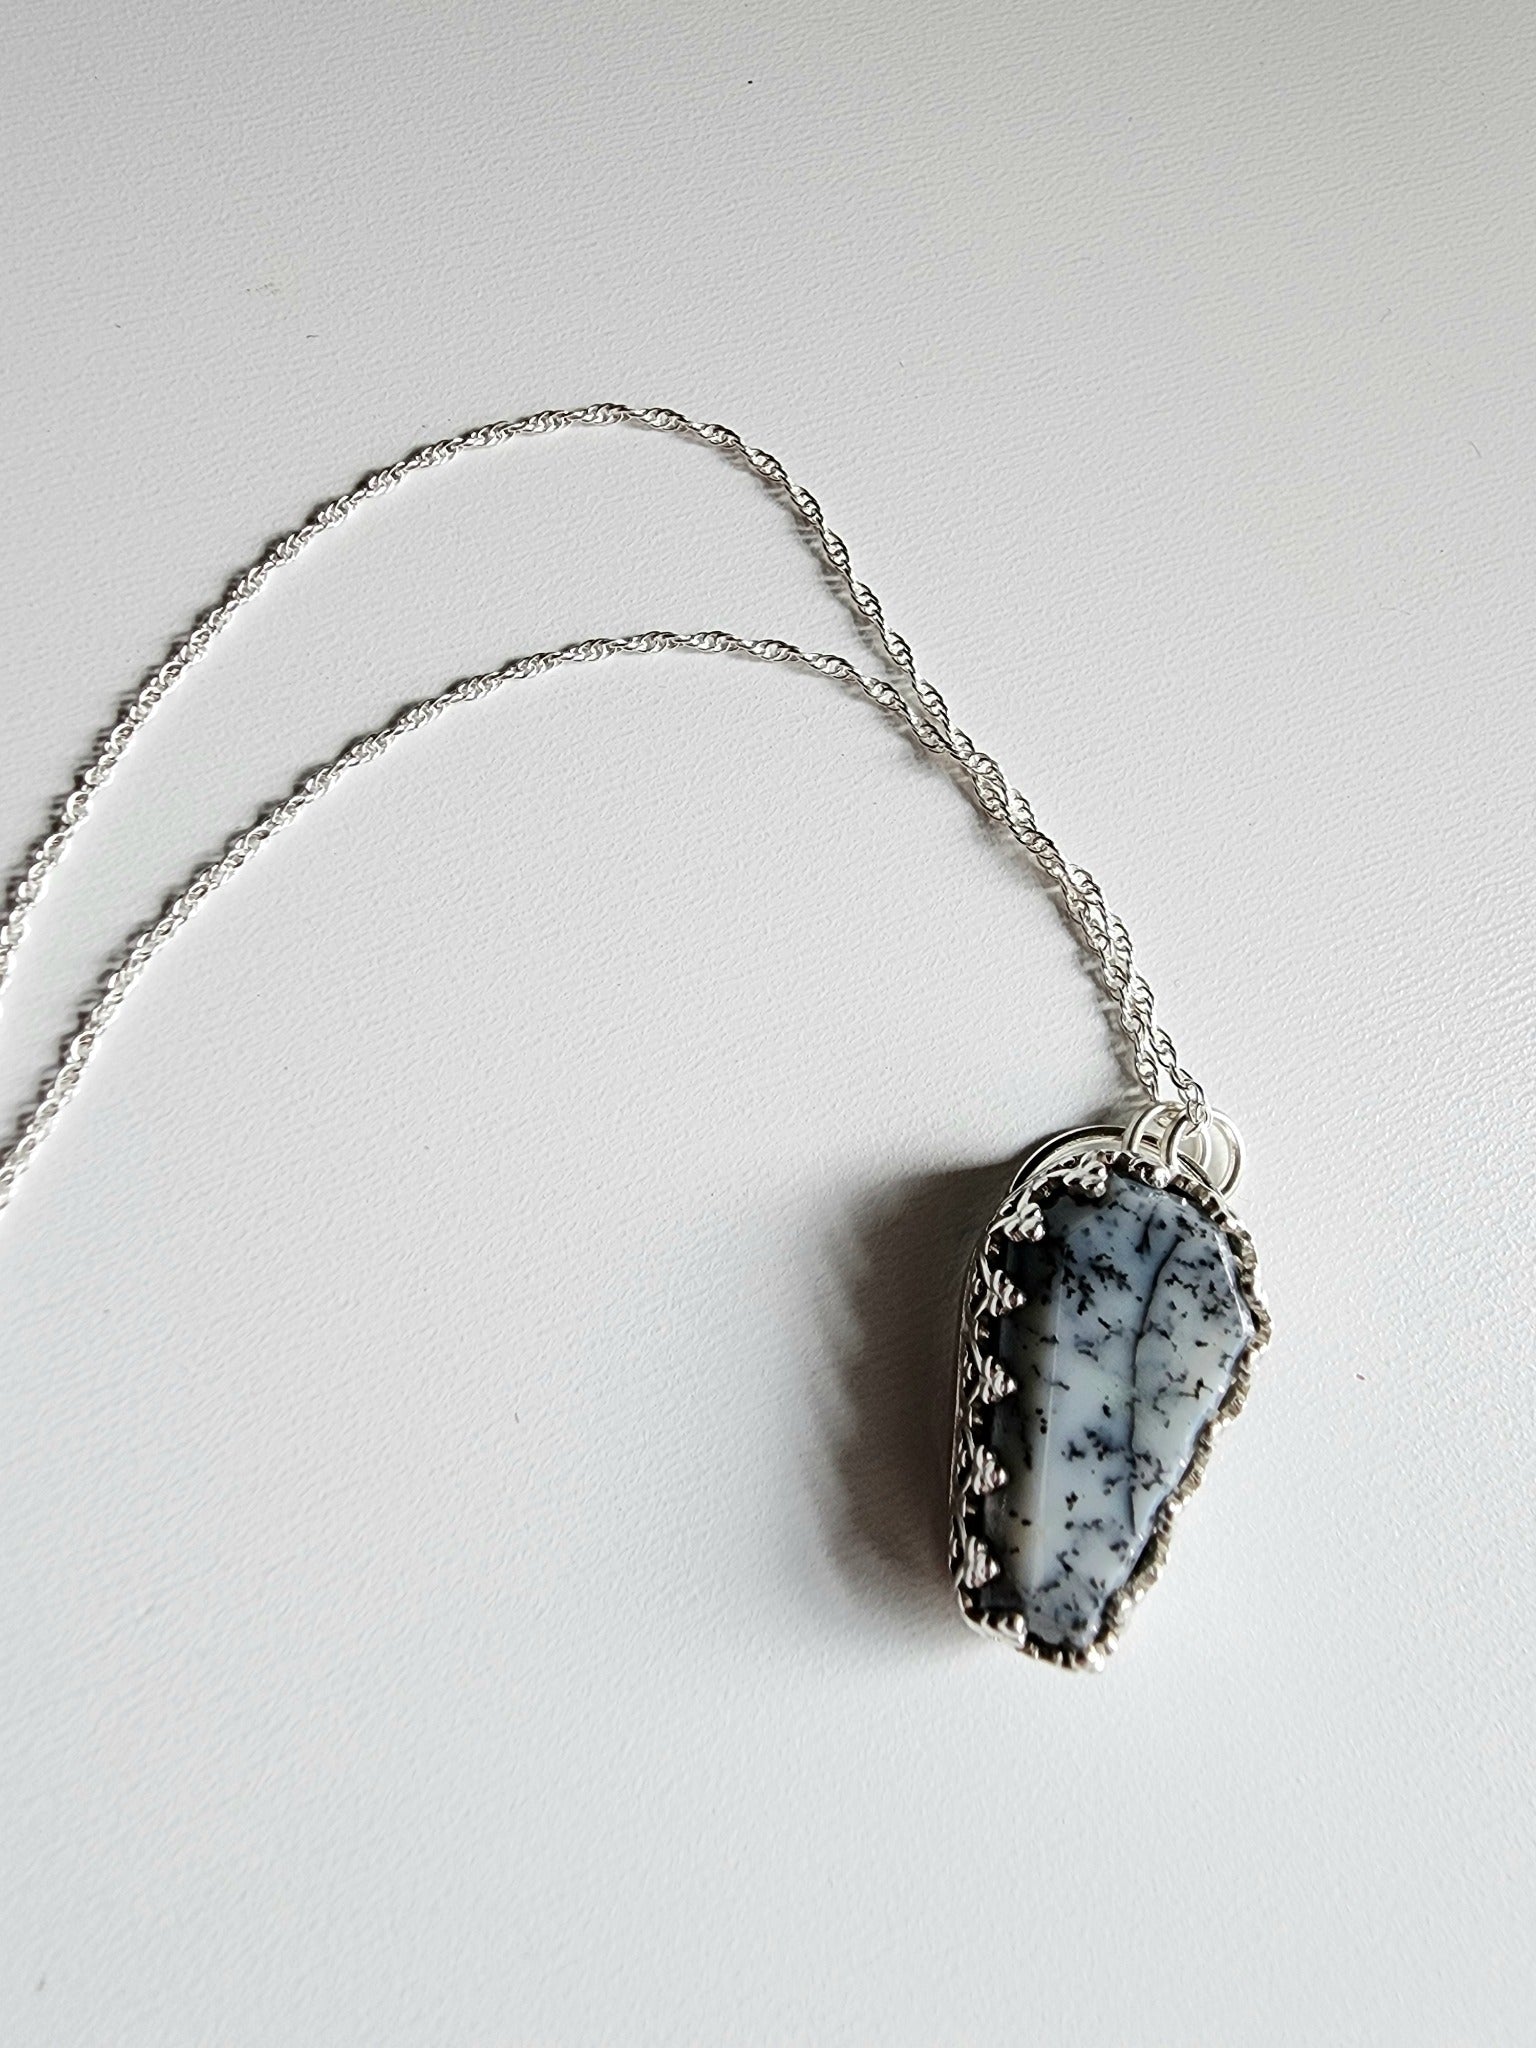 Dendritic agate coffin shaped stone mounted on a 18 inch sterling silver necklace by two jump rings. Stone is white with black variations surrounded by a pront castle style bezel wall that holds the stones in 